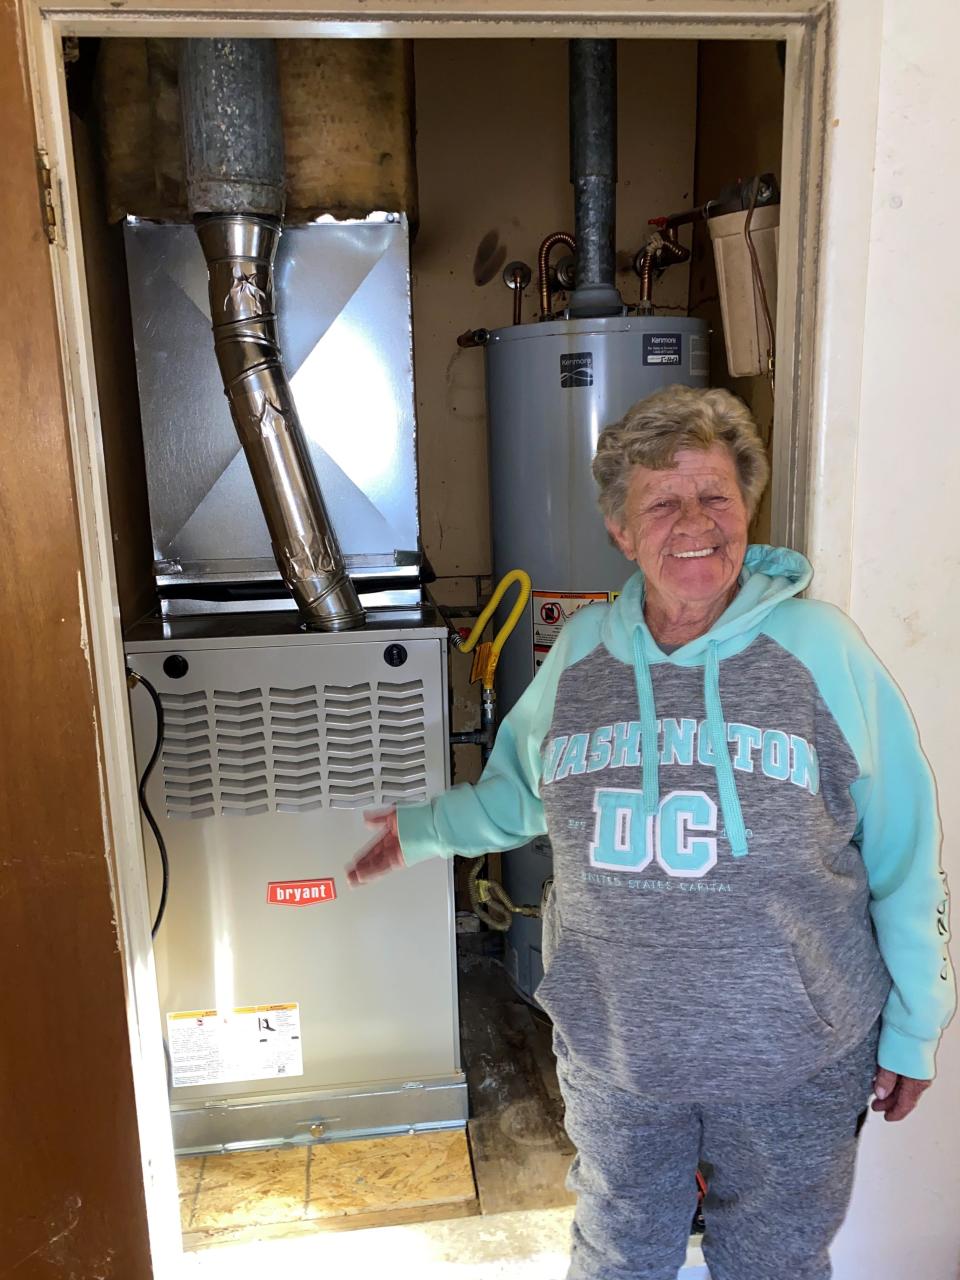 One or the winners in a giveaway program presented Robbins Heating & Air Conditioning Inc. shows off her new furnace.